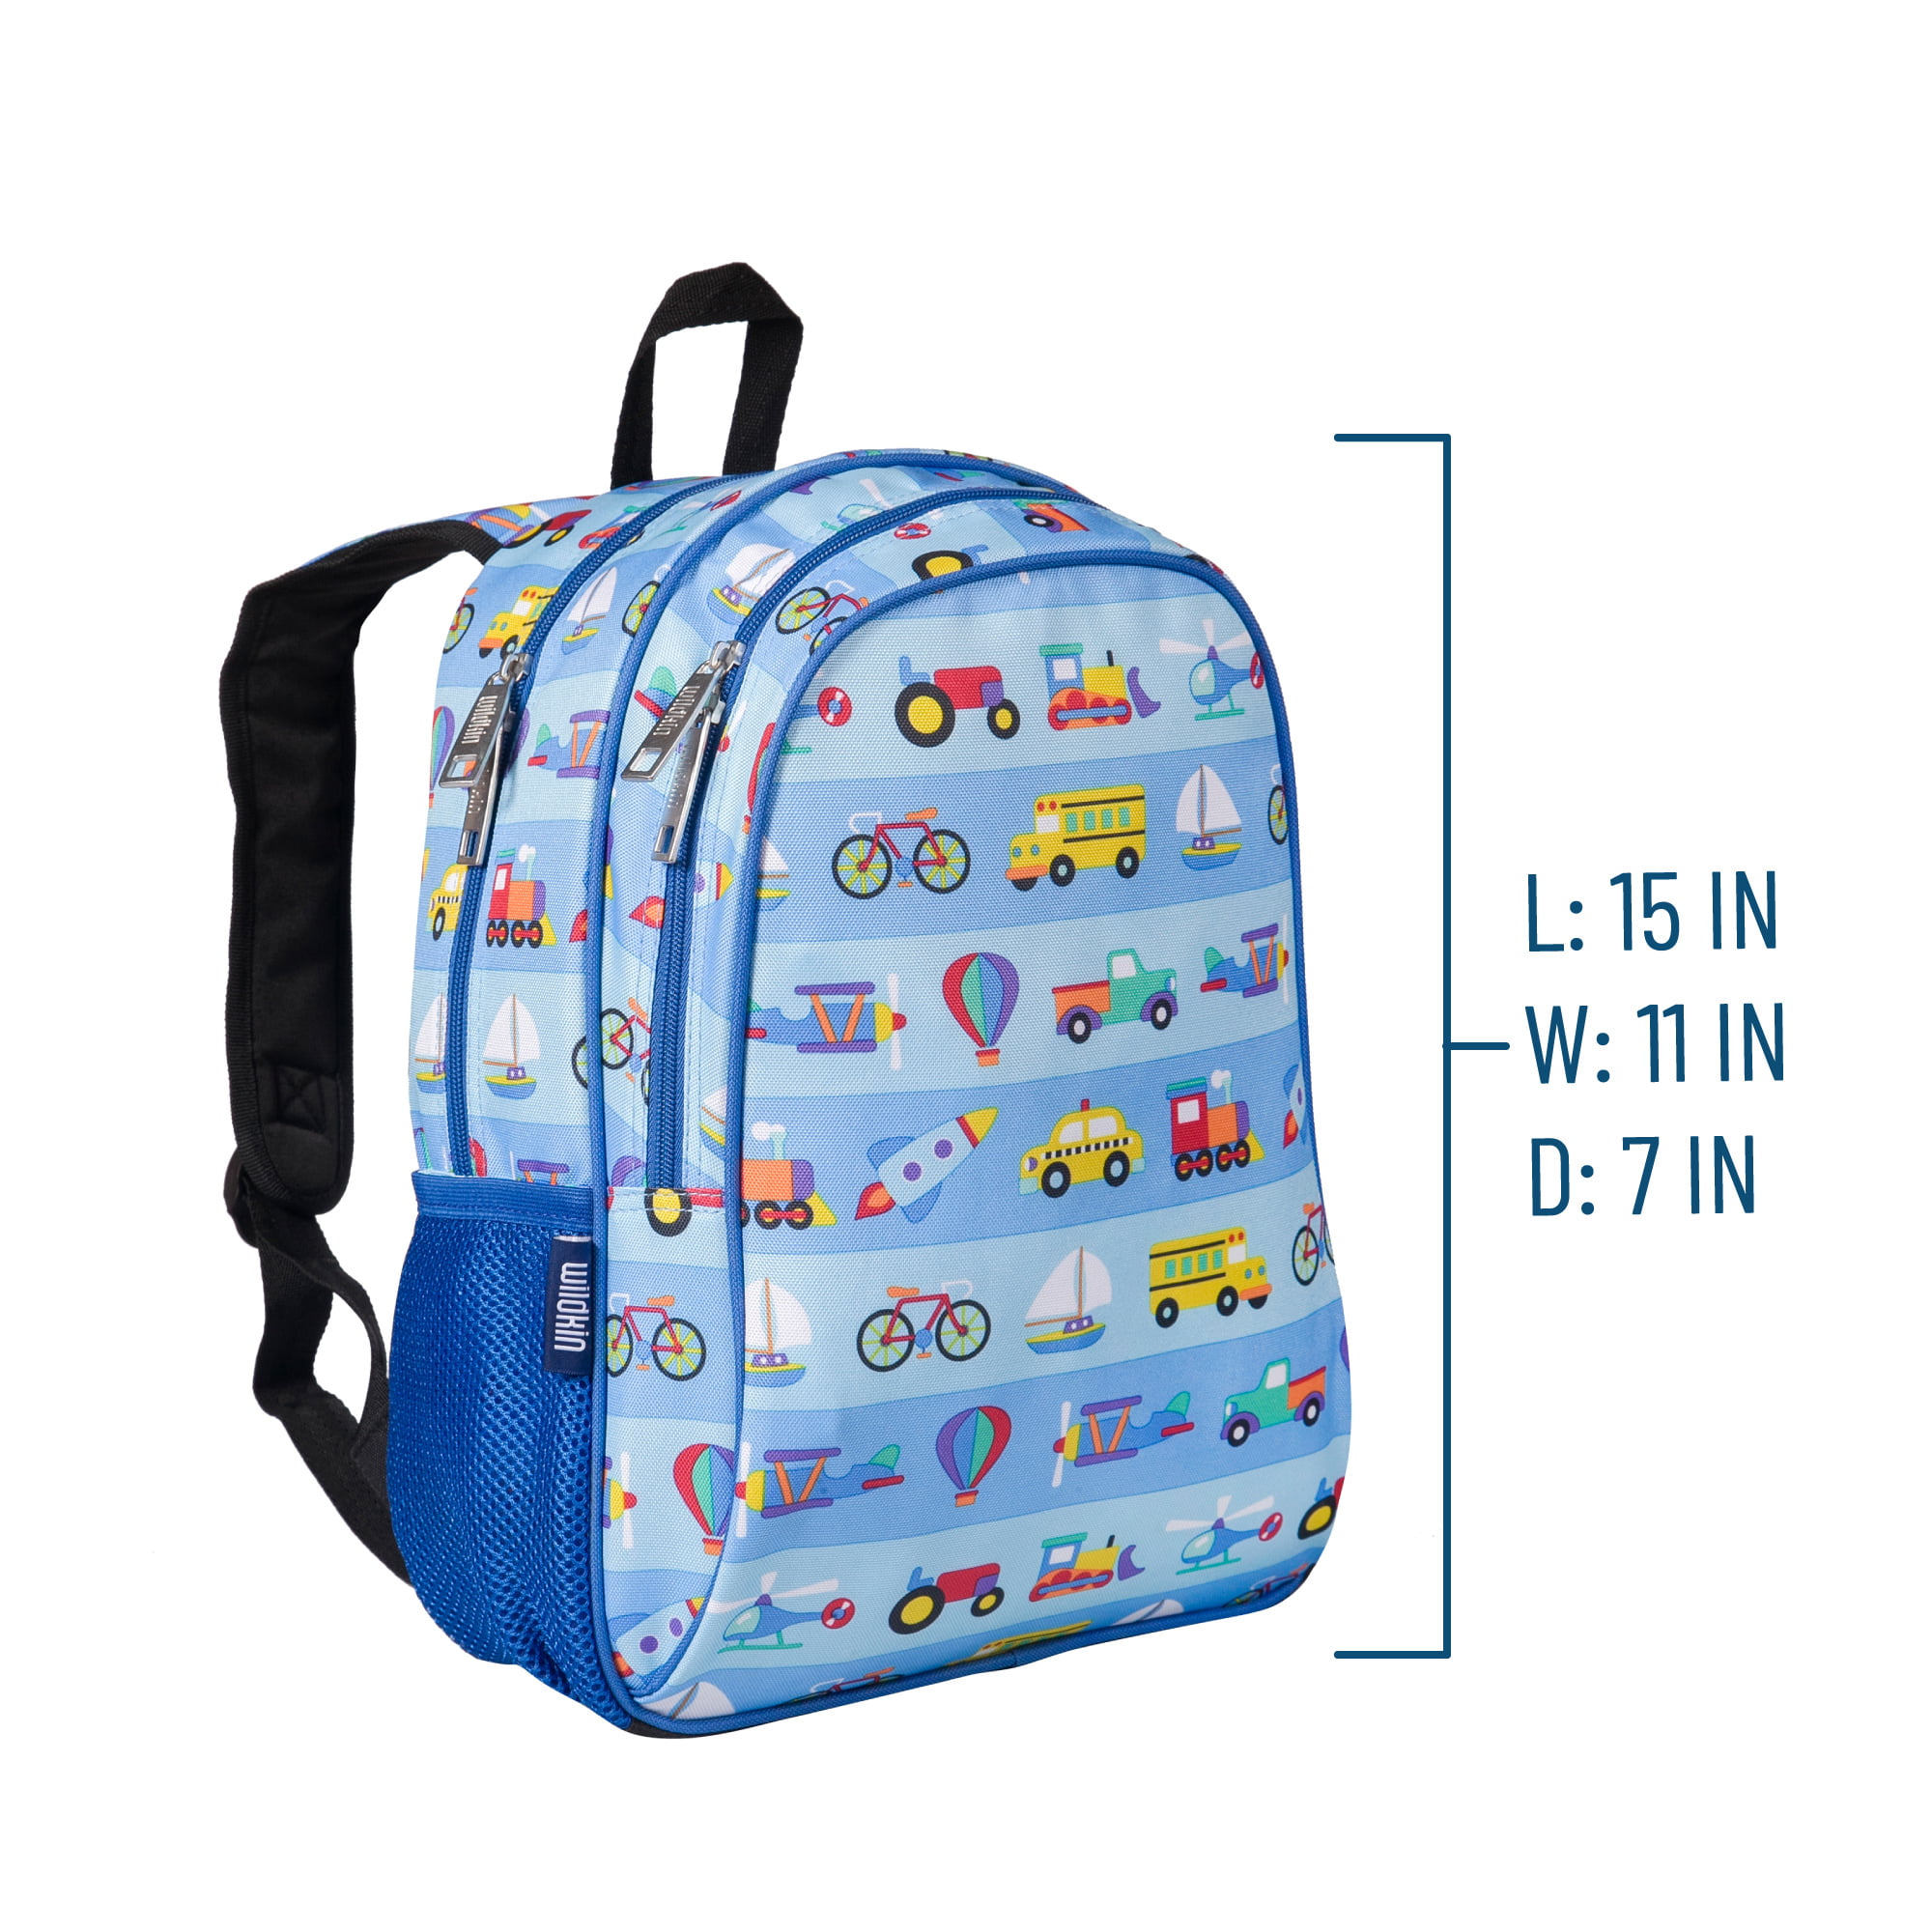 Fenrici Kids Backpack for Girls, Boys, Teens, Recycled School Bag with Padded Laptop Compartment, Ideal for Everyday Use